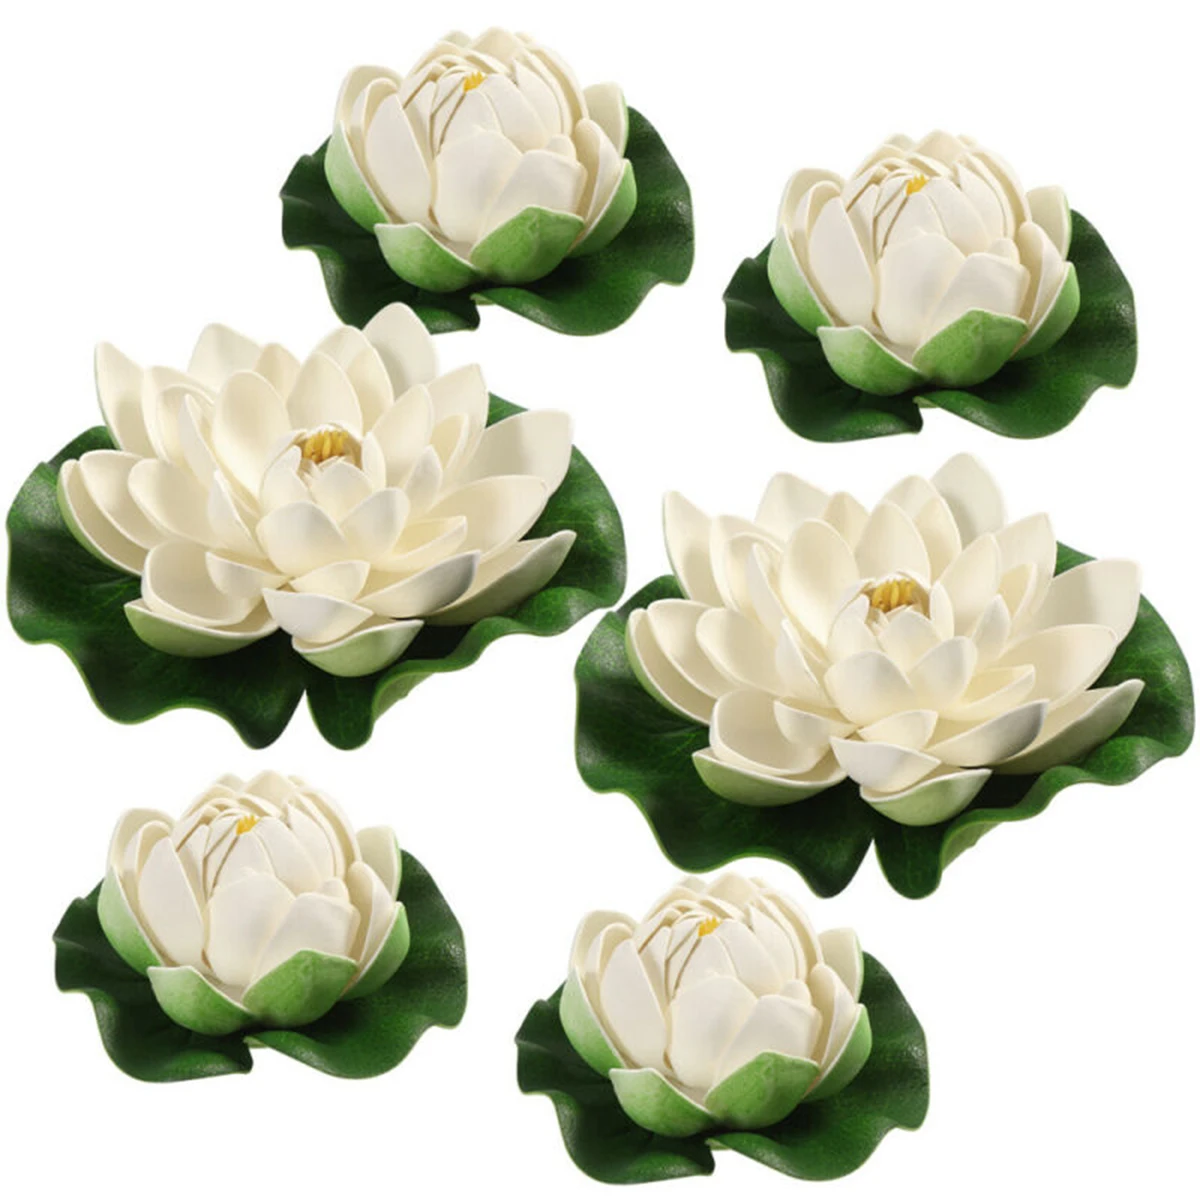 

6Pcs Floating Artificial Lotus Flowers Fake Plants White Water Lily Leaf for Wedding Party Pond Decorations Garden Home Decor